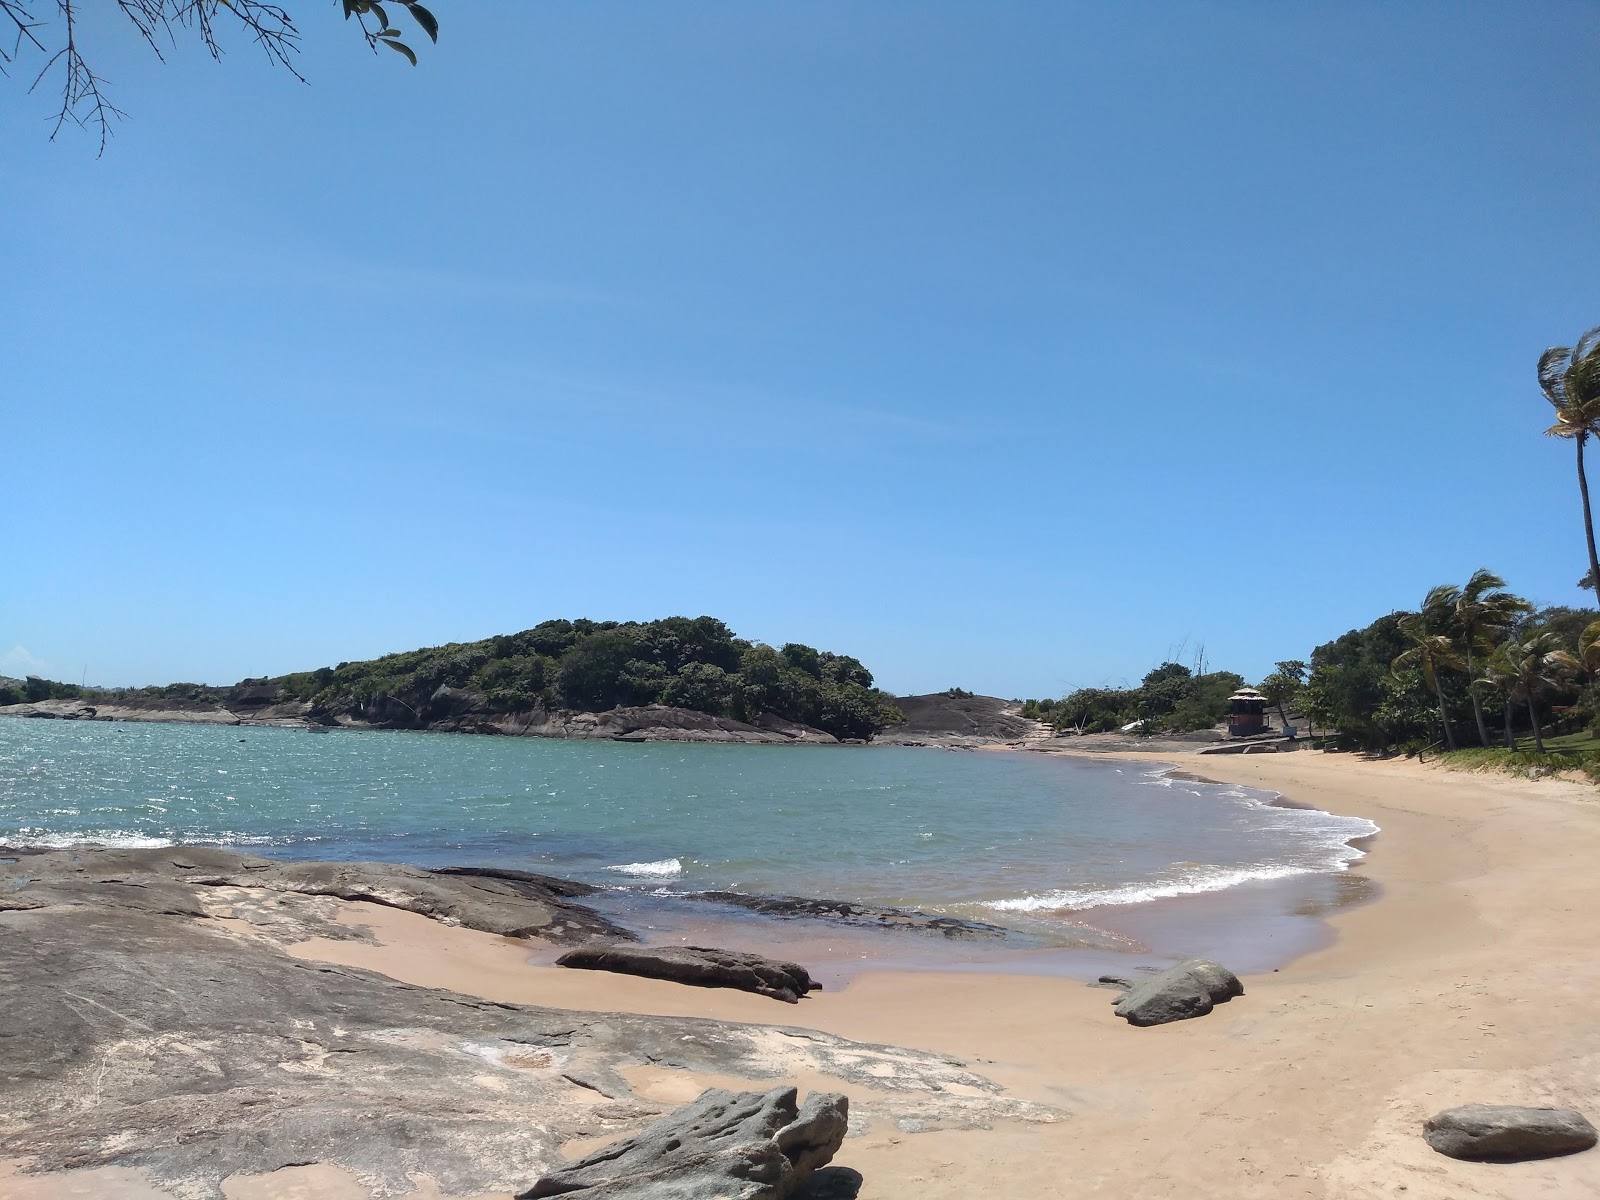 Photo of Aldeia Beach and the settlement